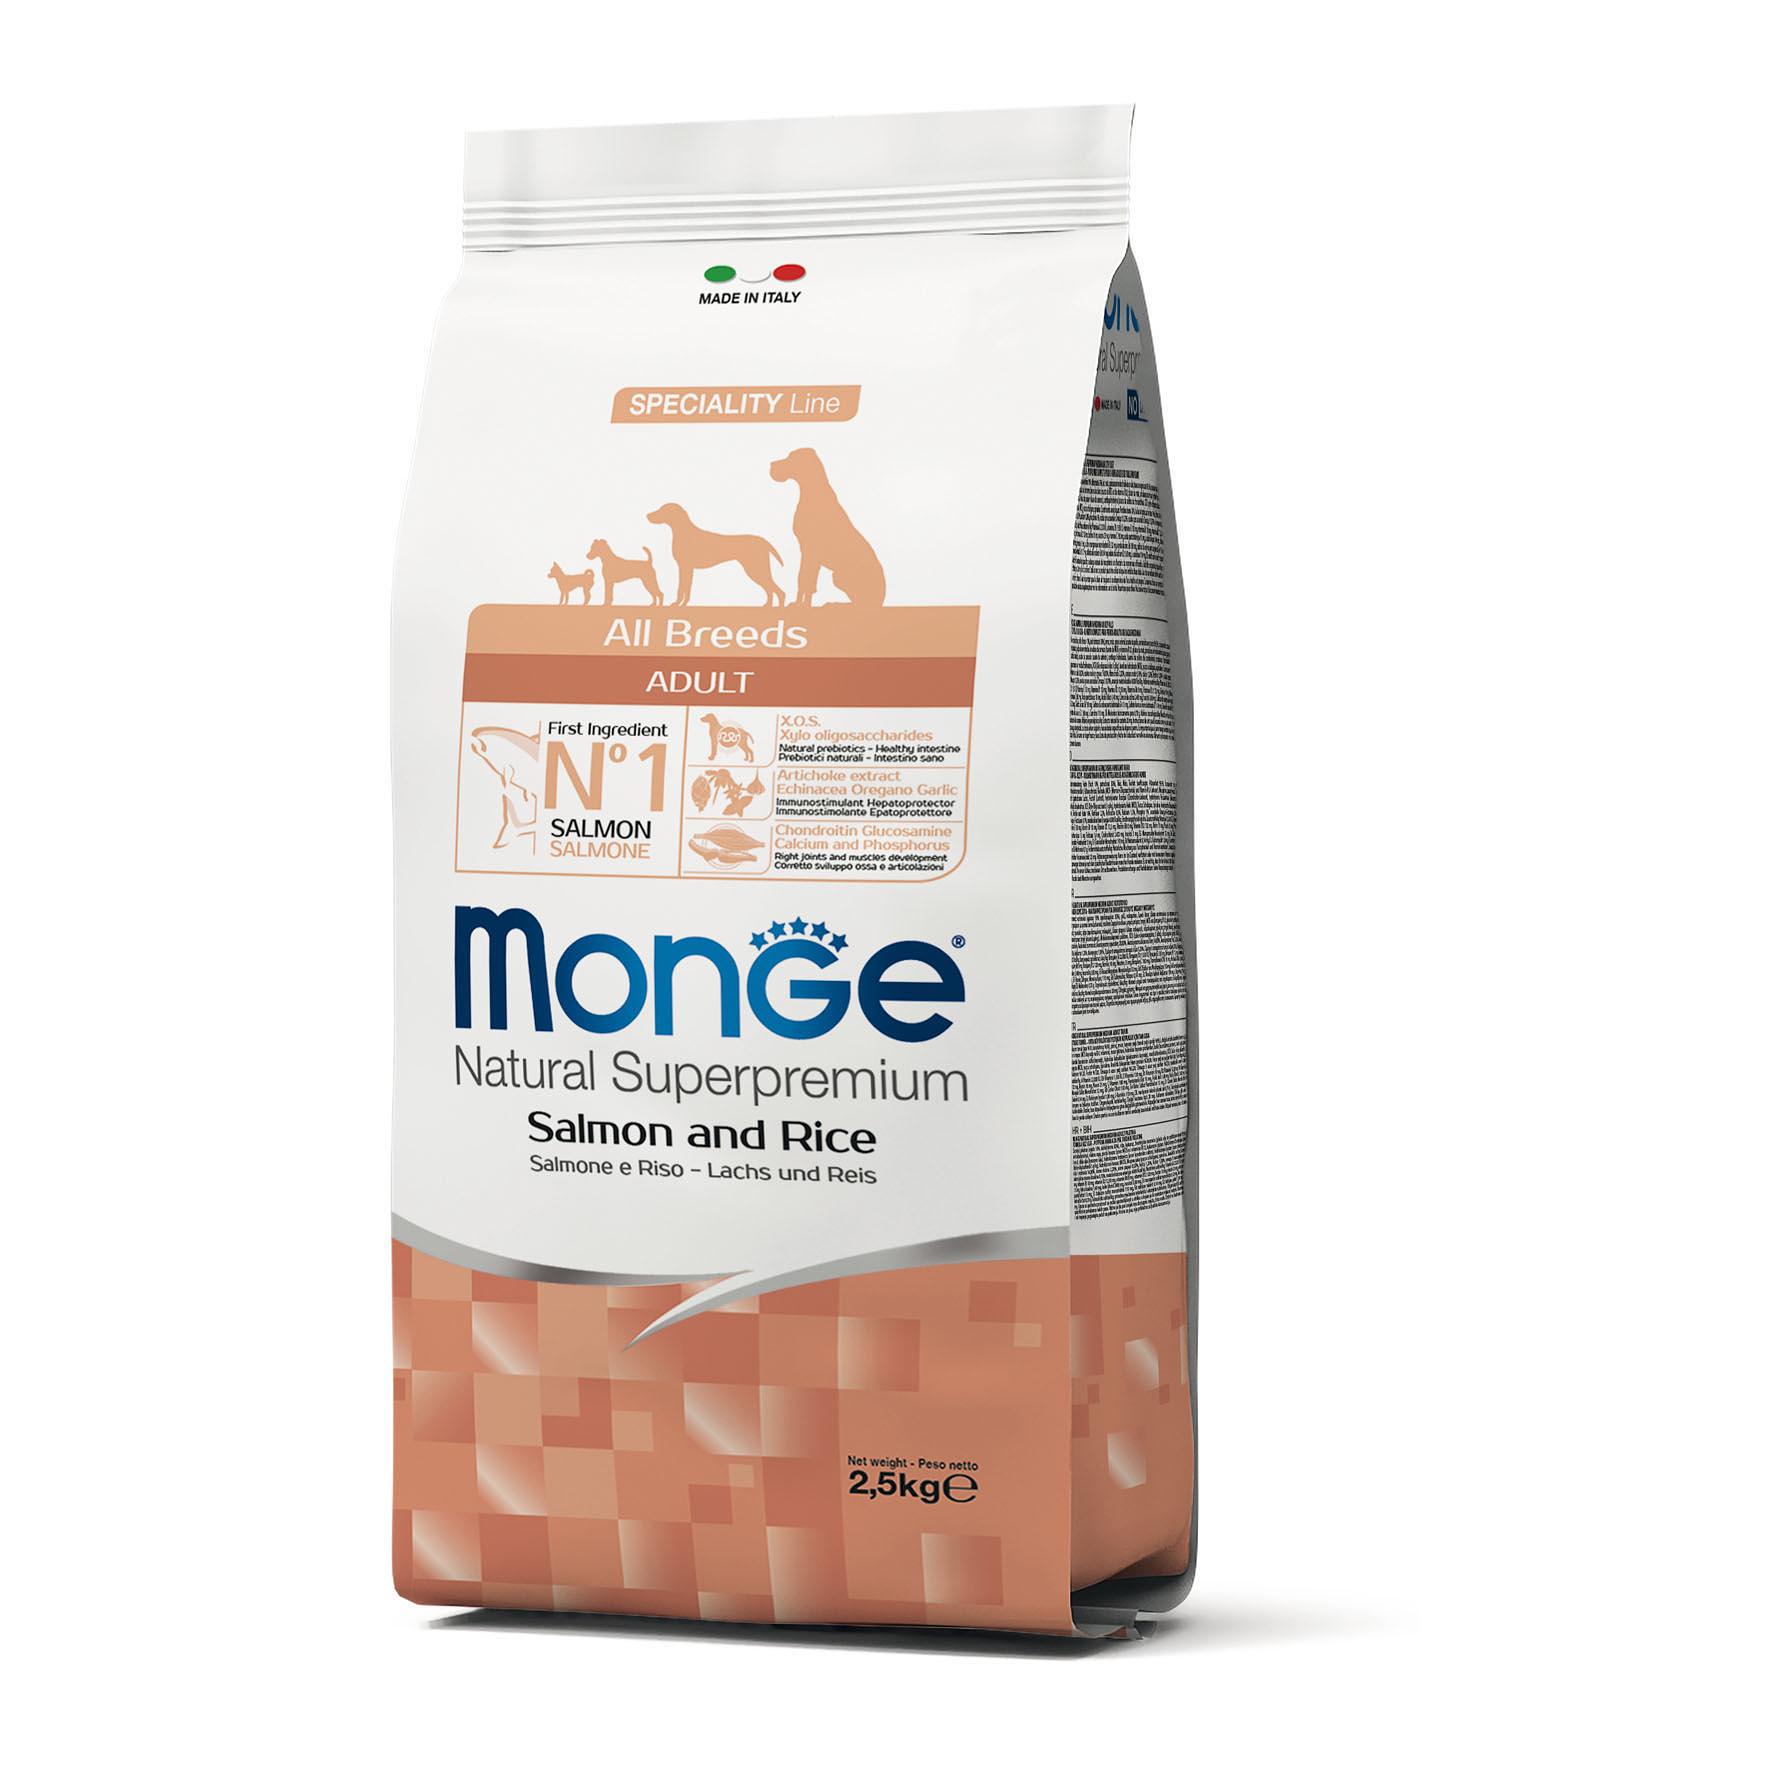 Monge Speciality Line All Breeds – Lachs